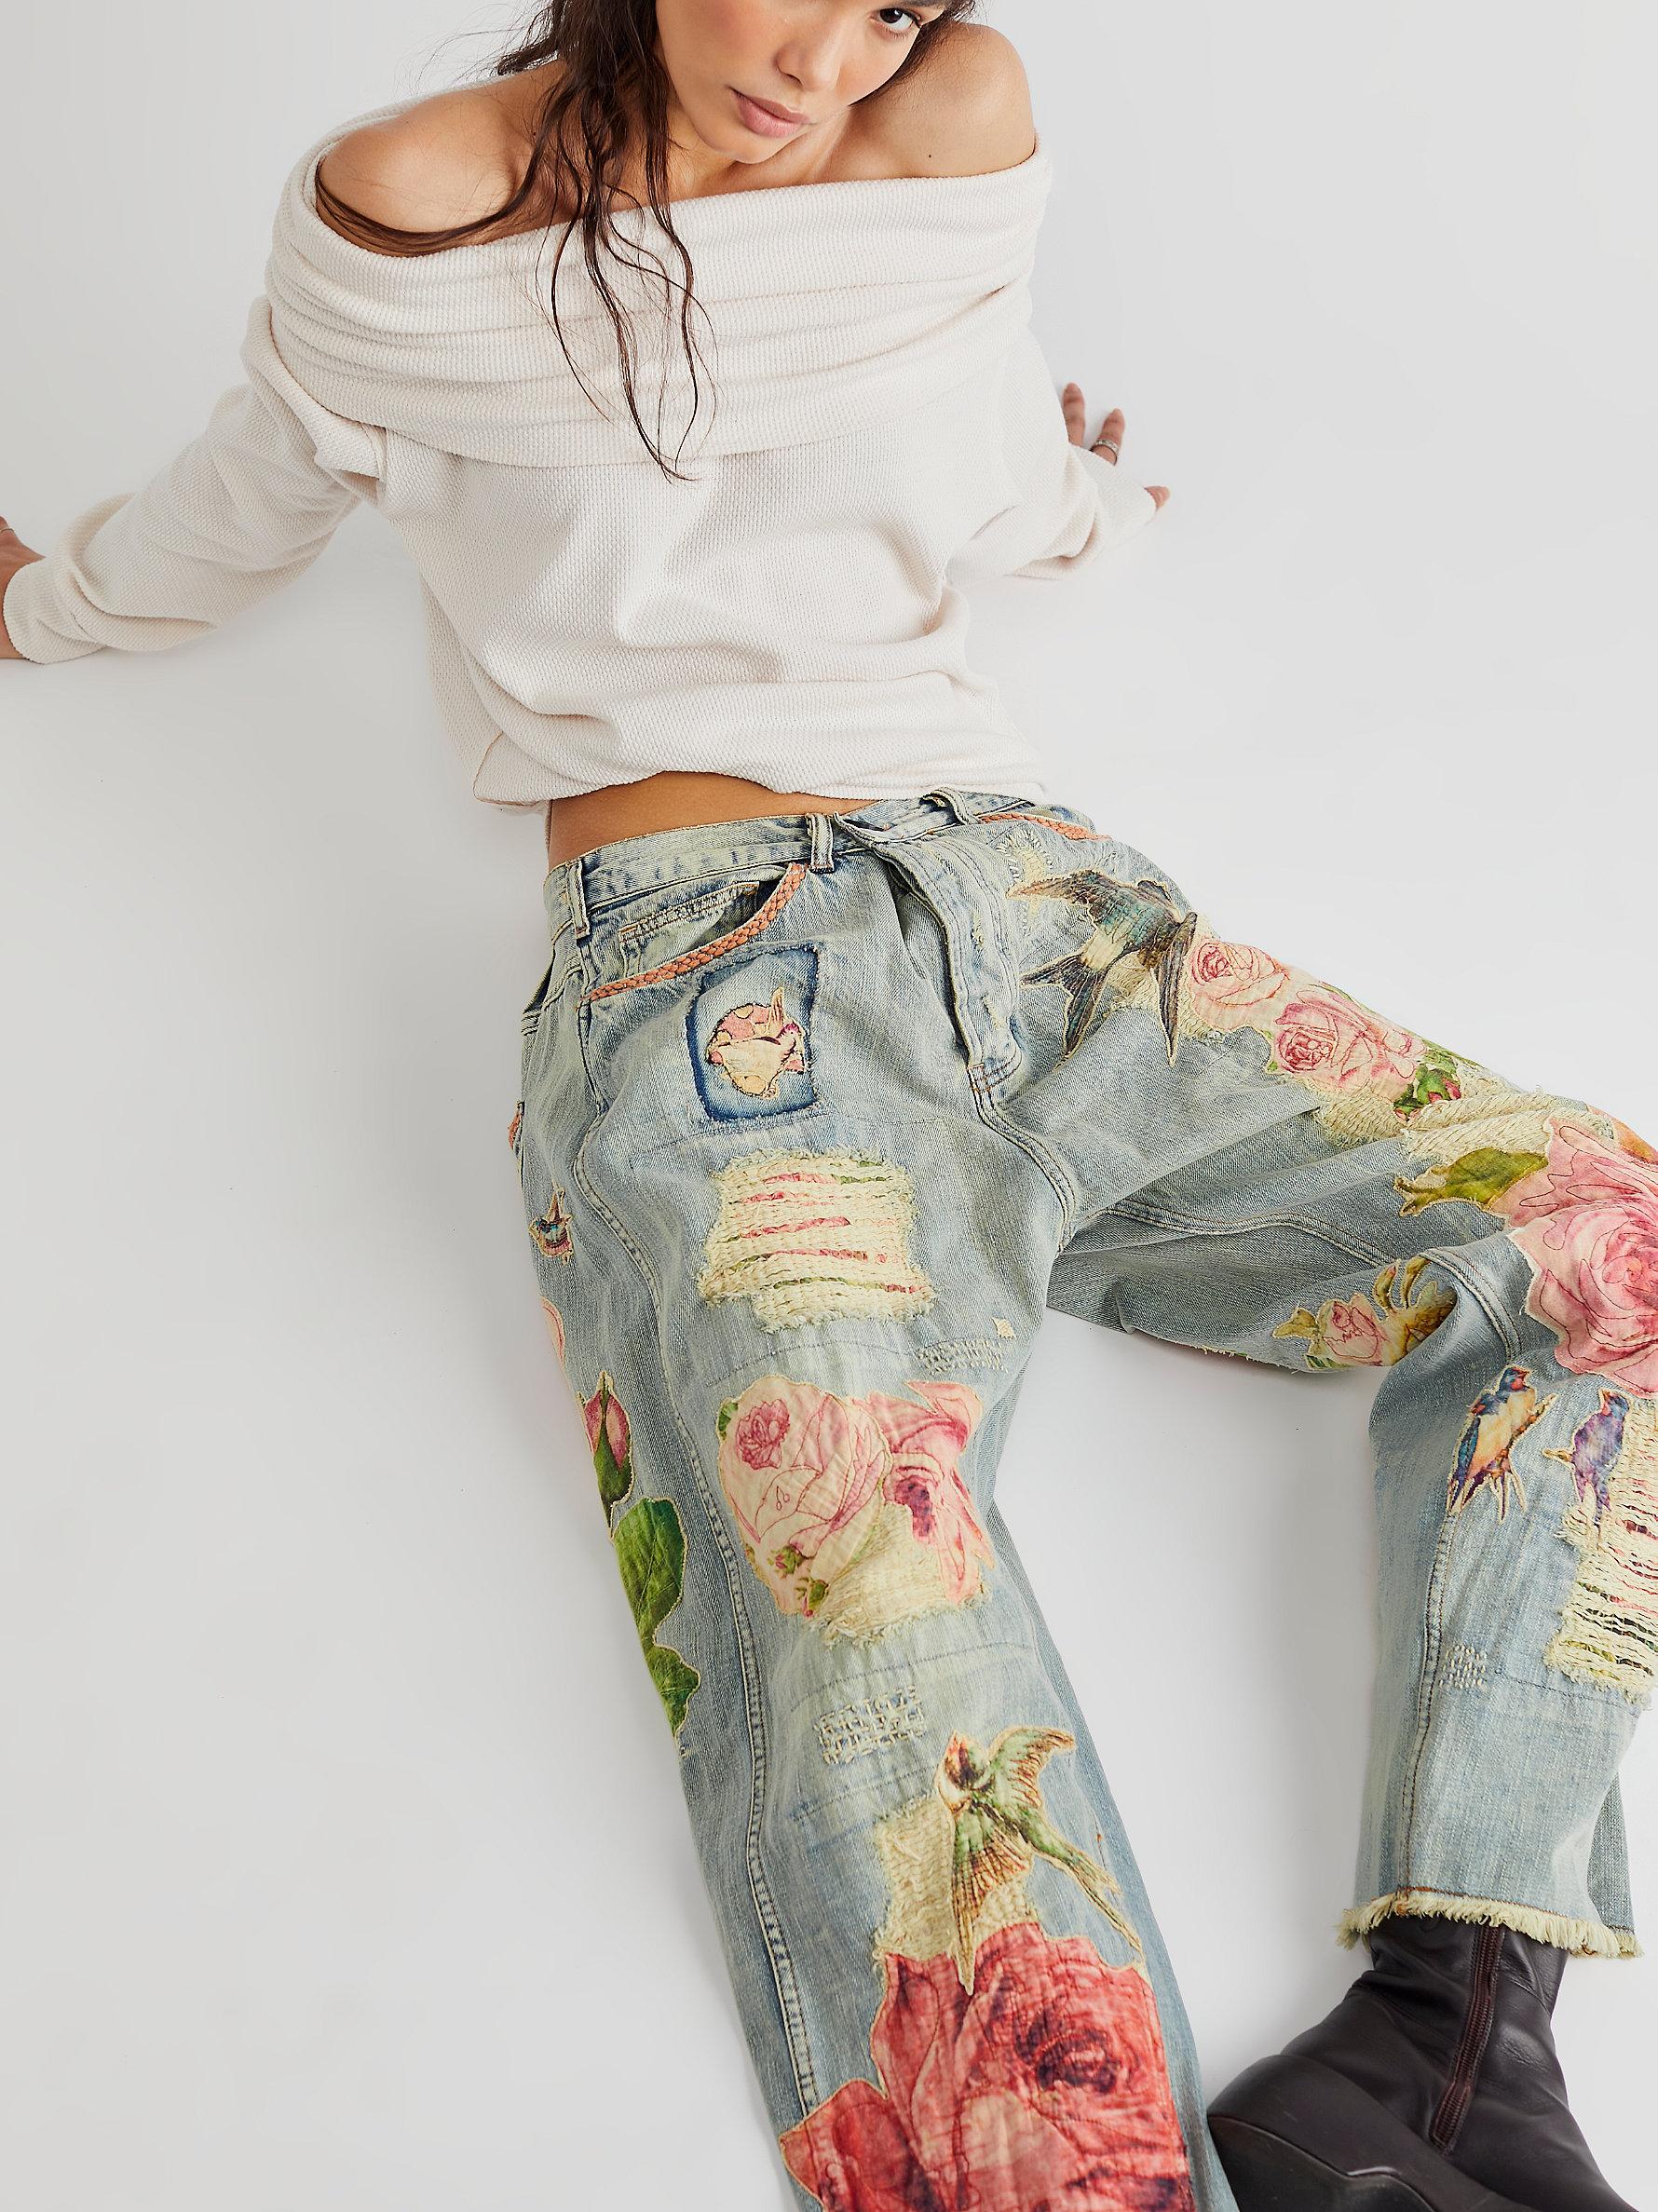 https://cdna.lystit.com/photos/freepeople/03335e96/free-people-Washed-Denim-Magnolia-Pearl-Rose-Embroidered-Jeans.jpeg